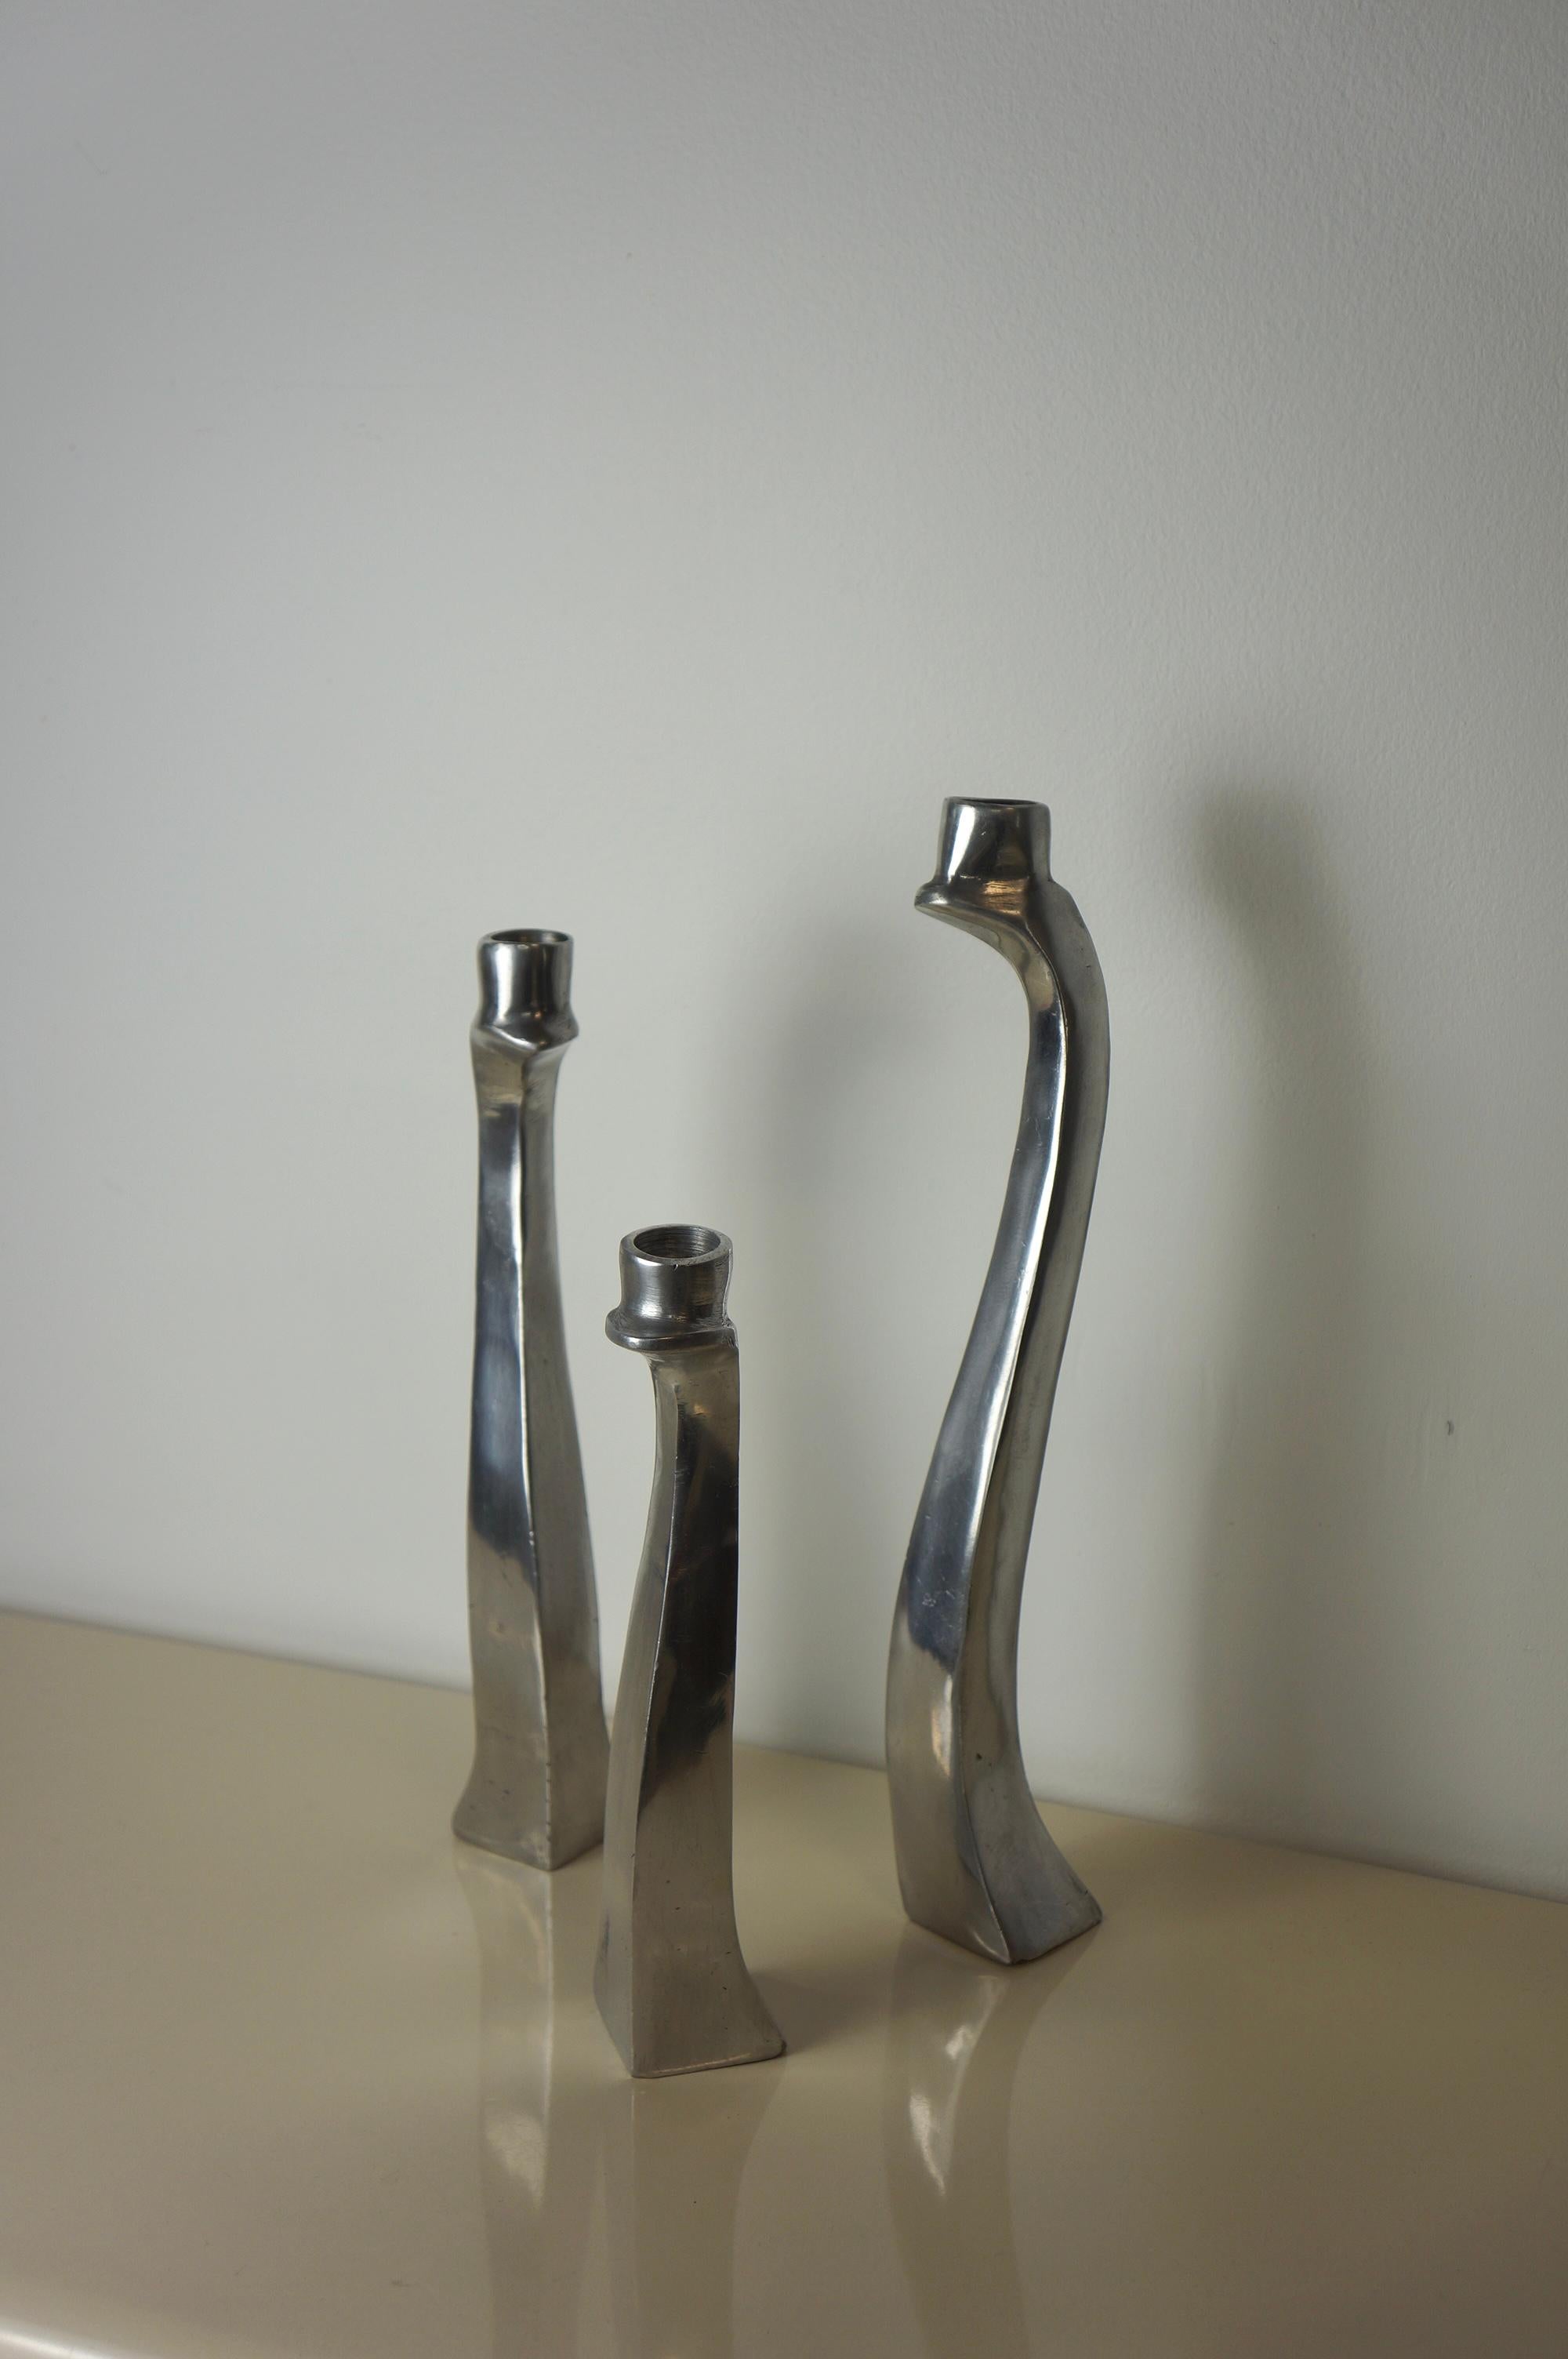 A set of three biomorphic polished aluminum candle holders. They’re made in the 1980s. This style of candle holders are attributed to Escapade Paris. These candle holders are free formed with a sculptural polished aluminum body. The set of three